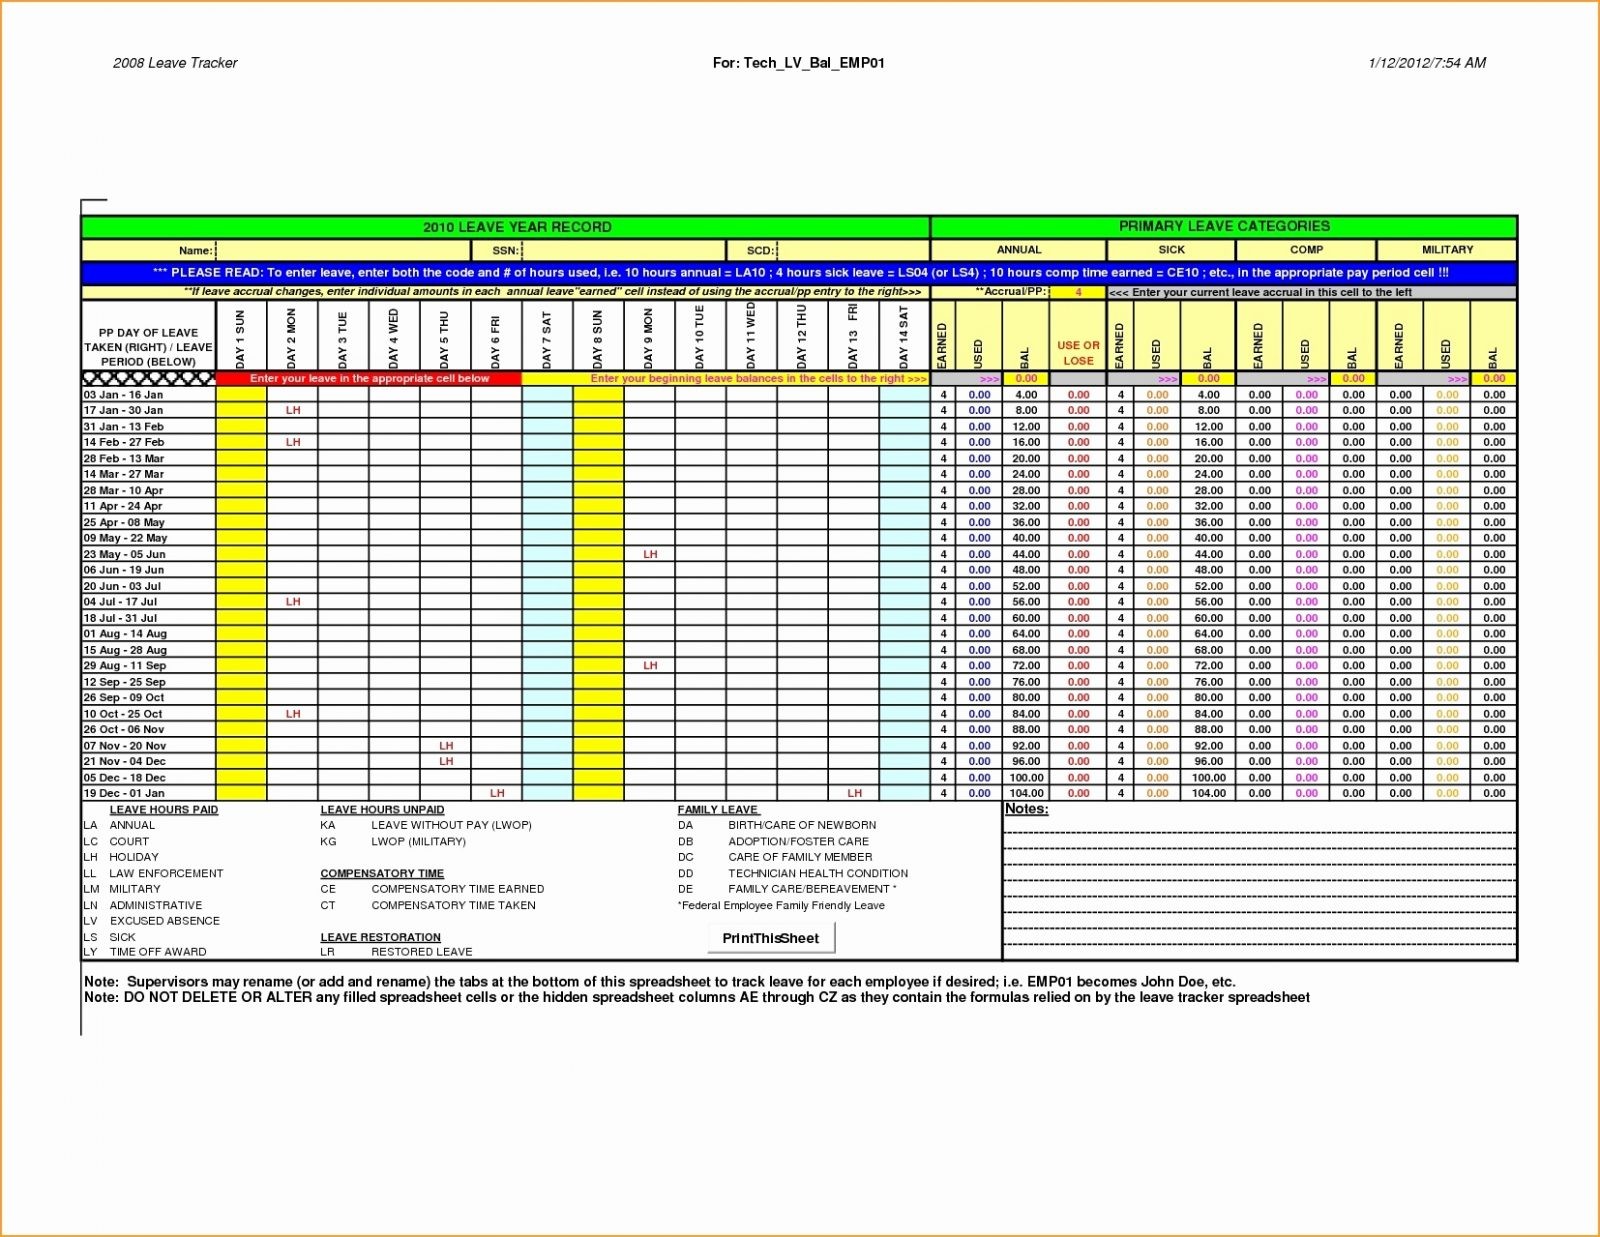 Grant Tracking Spreadsheet Excel On Templates Sample Document